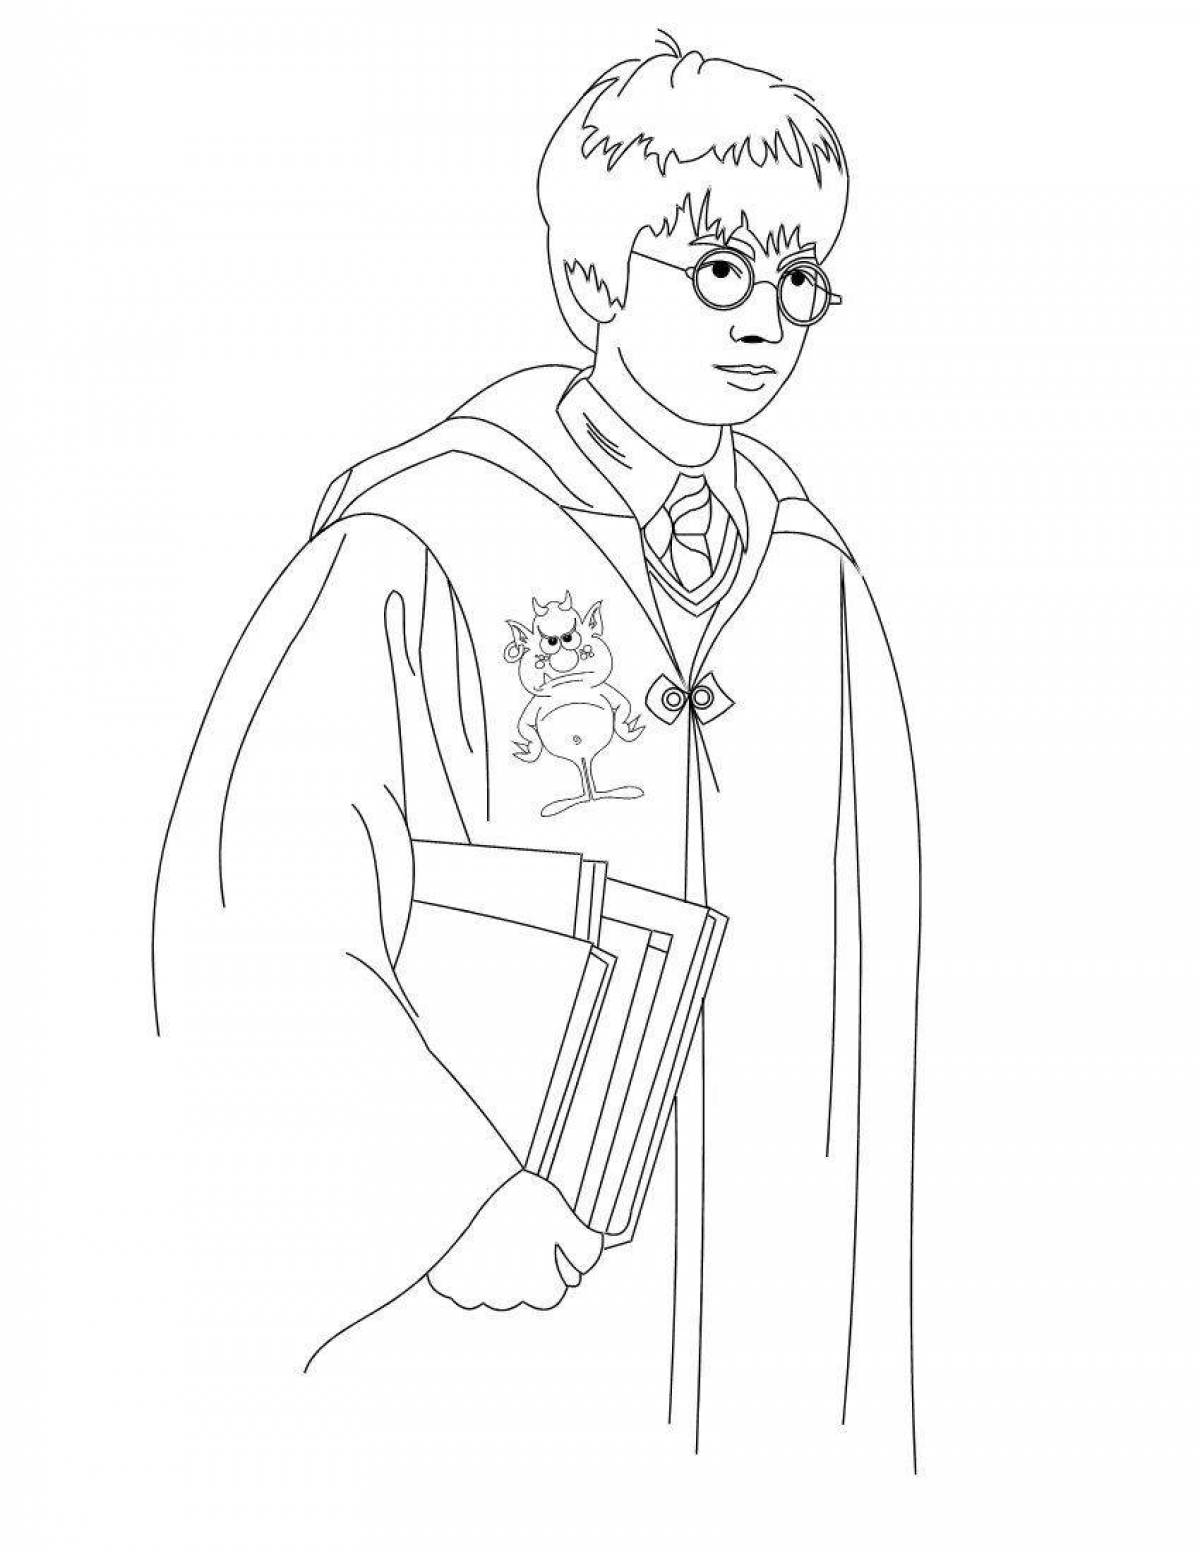 Coloring page playful draco malfoy